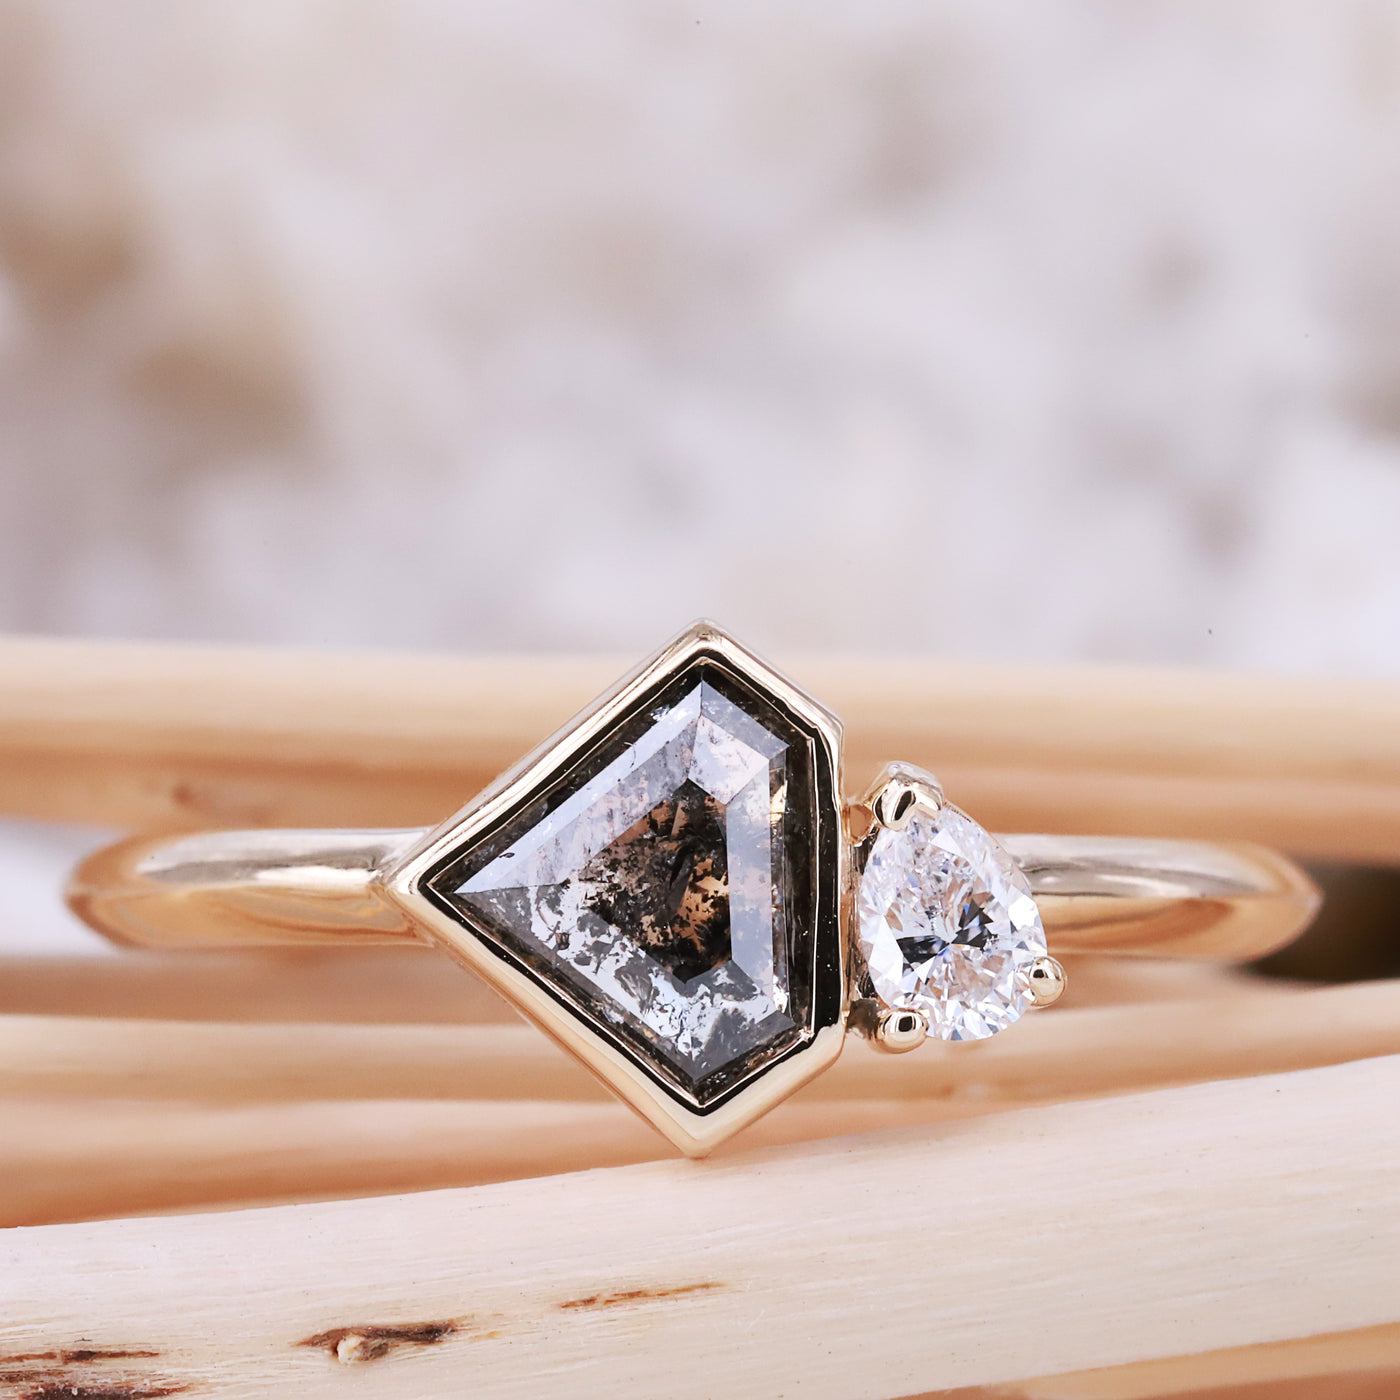 Get the Perfect Blend of Style and Elegance with our Salt and Pepper Geometric Shape Engagement Ring